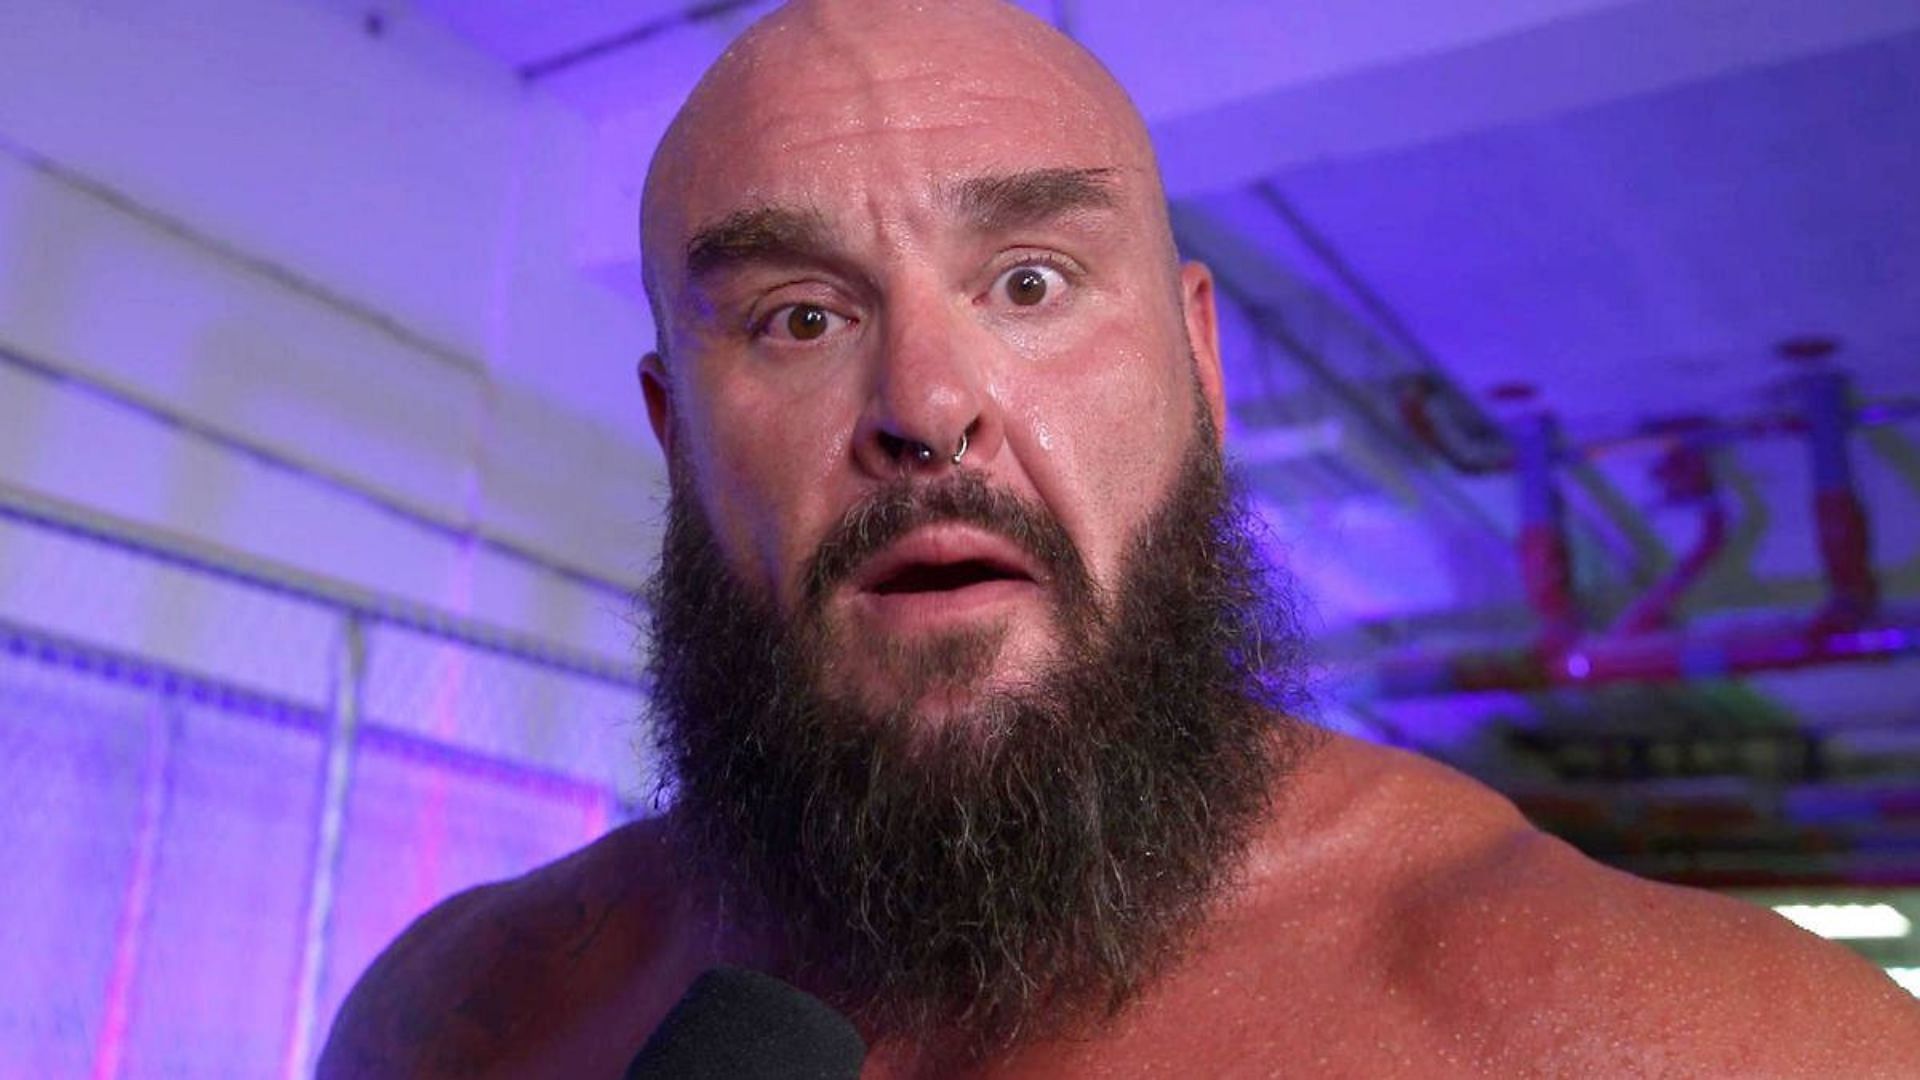 Braun Strowman made a controversial statement which discredits &quot;flippy&quot; wrestlers.